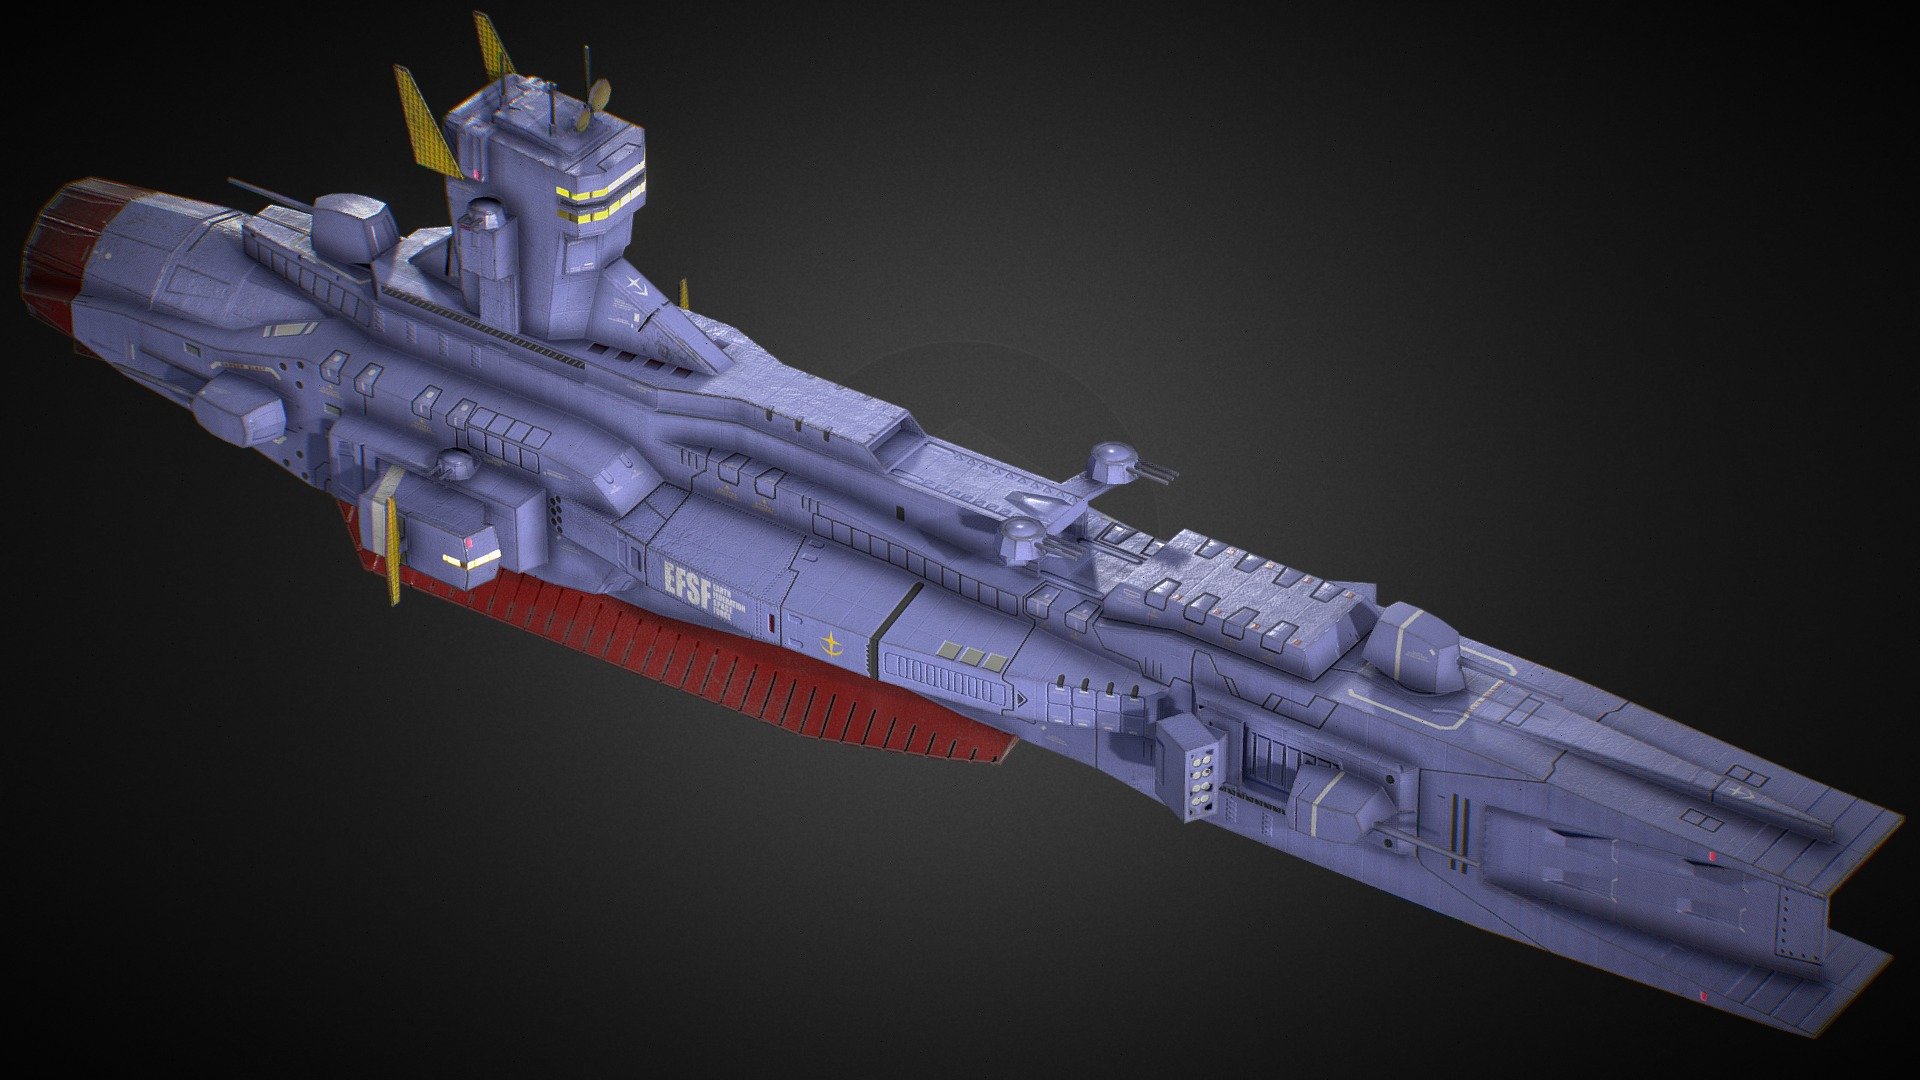 EFF Salamis Class Space Cruiser Federation Colour
This model was made for One Year War mod of Hearts of Iron IV.
Our Mod Steam Home Page
https://steamcommunity.com/sharedfiles/filedetails/?id=2064985570 - EFF Salamis Class SpaceCruiser Federation Colour - 3D model by One Year War Mod (@hoi4oneyearwar) 3d model